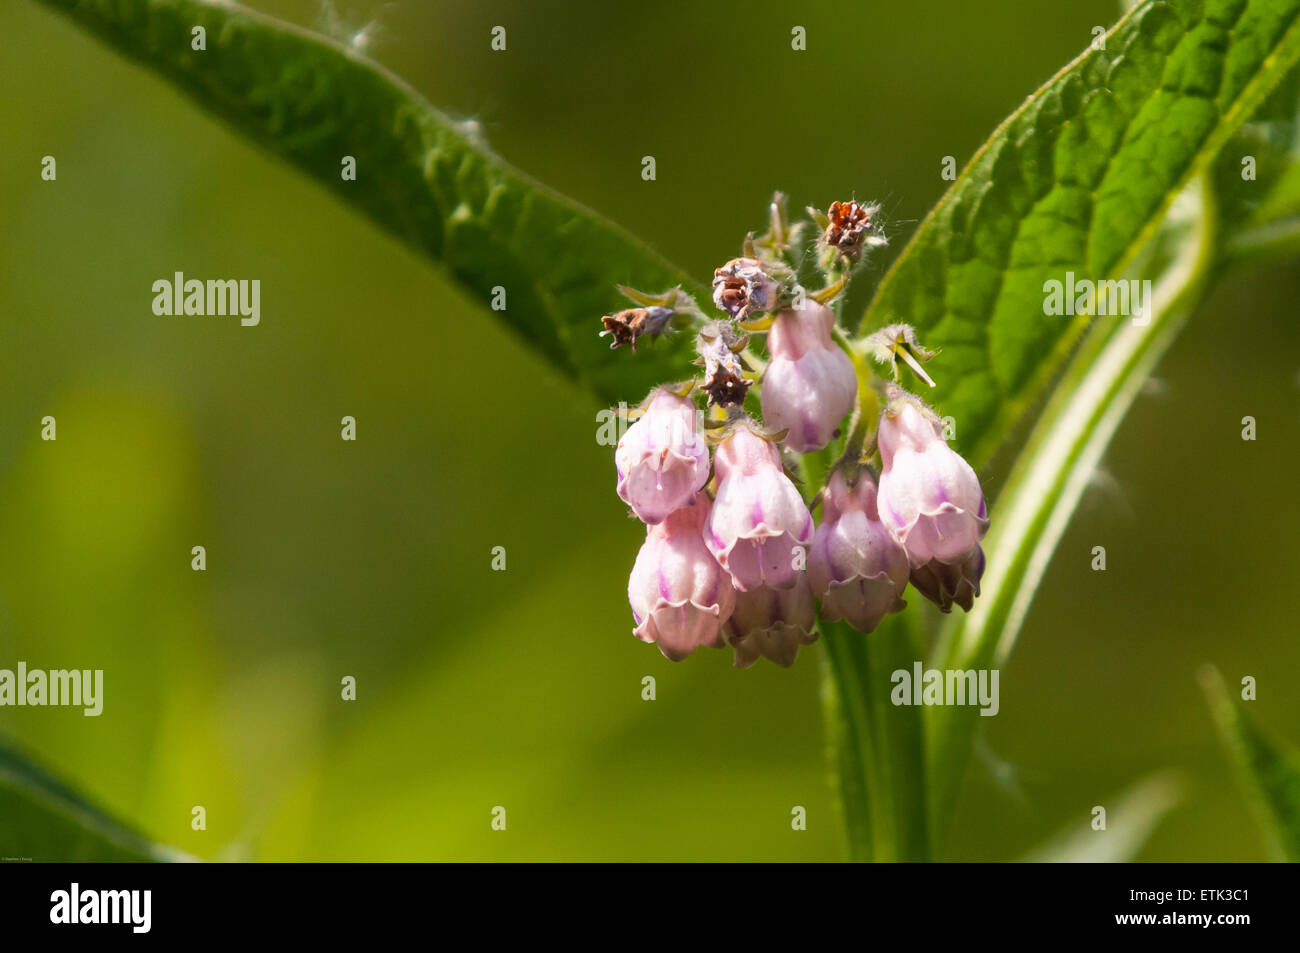 A close up photograph of a Comfrey Flower, Symphytum, probably Russian Comfrey, with a diffused background. Stock Photo